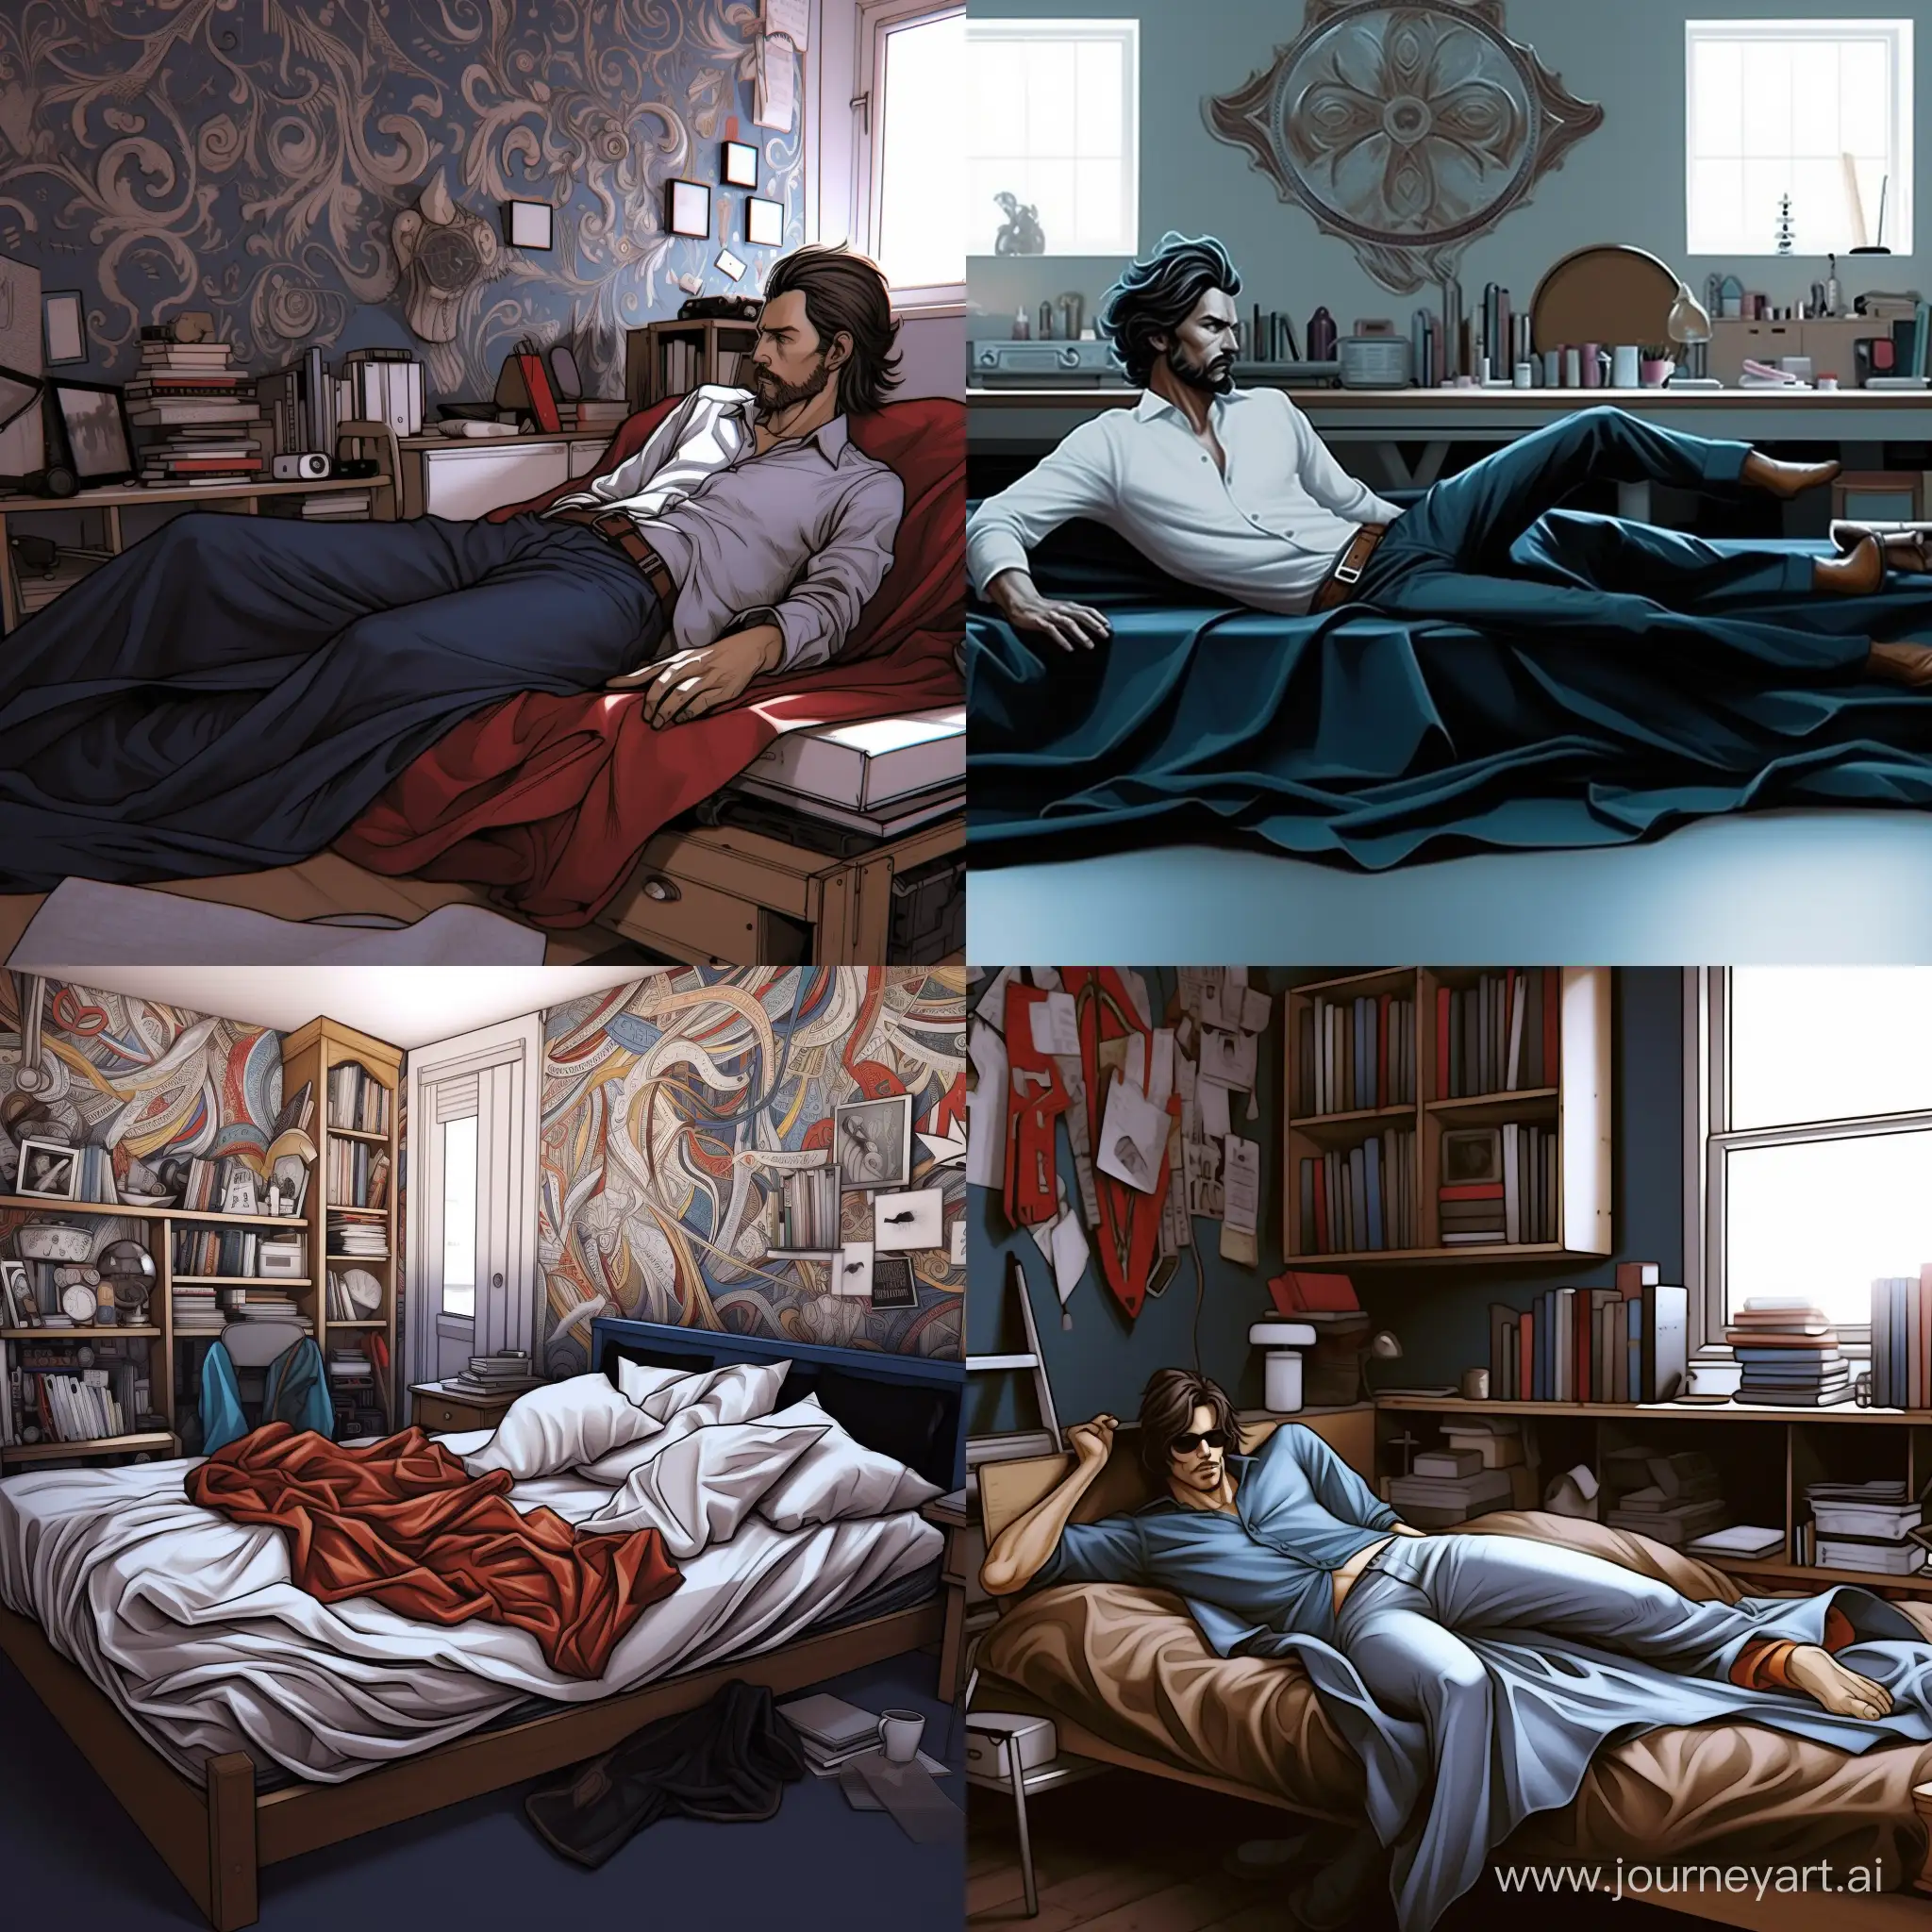 Sorcerer-Supreme-in-Repose-Doctor-Strange-with-Long-Hair-Lying-on-Bed